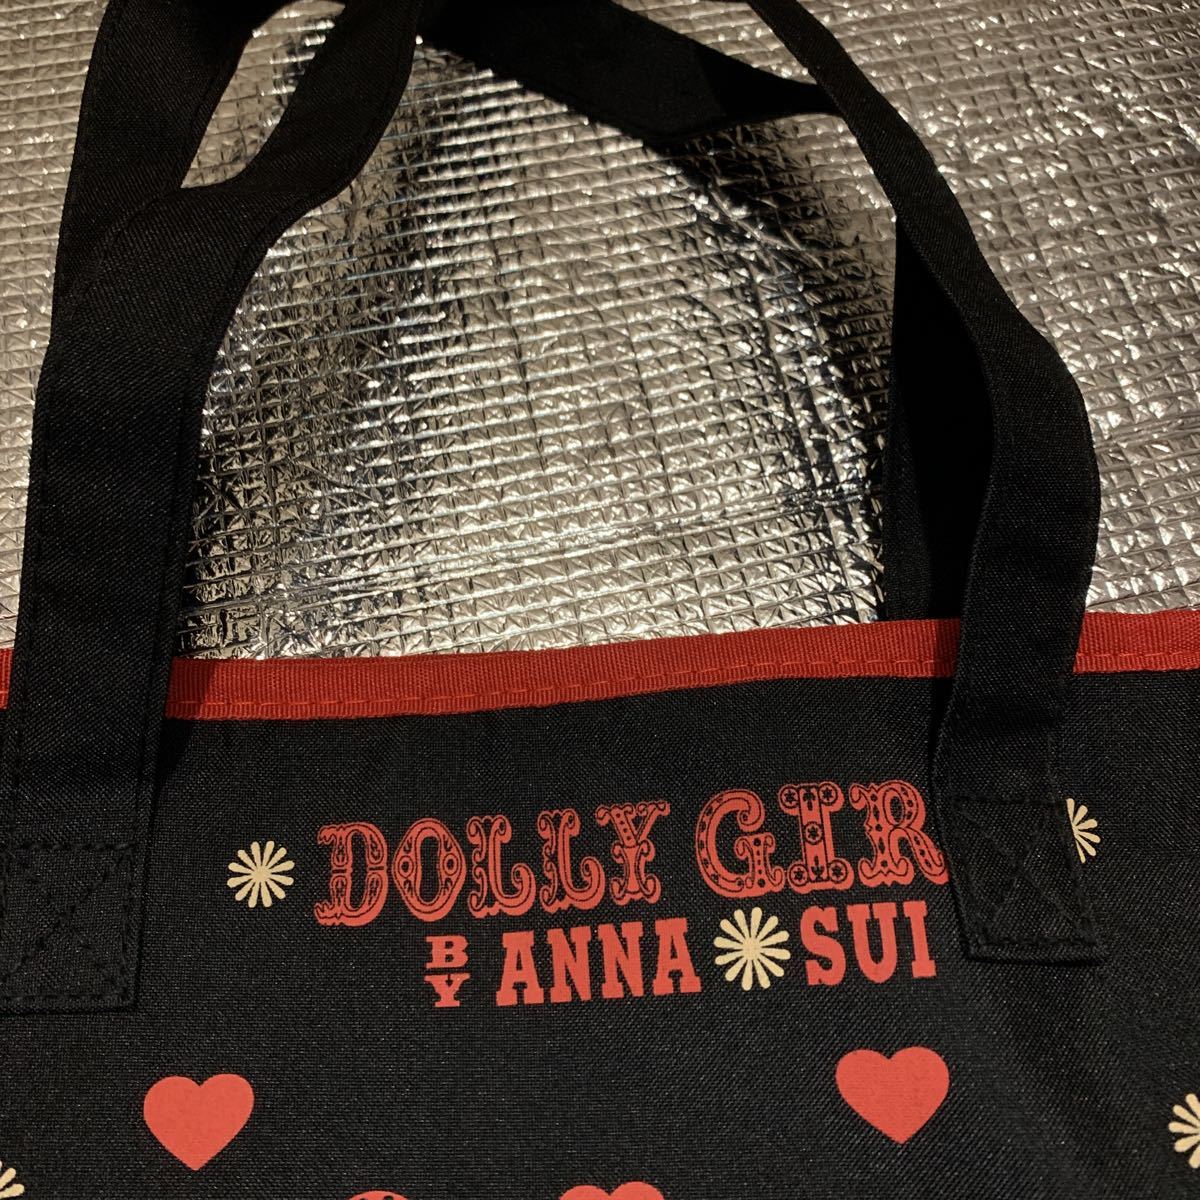 DOLLY GIRL BY ANNA SUI 付録 トートバッグとー - トートバッグ